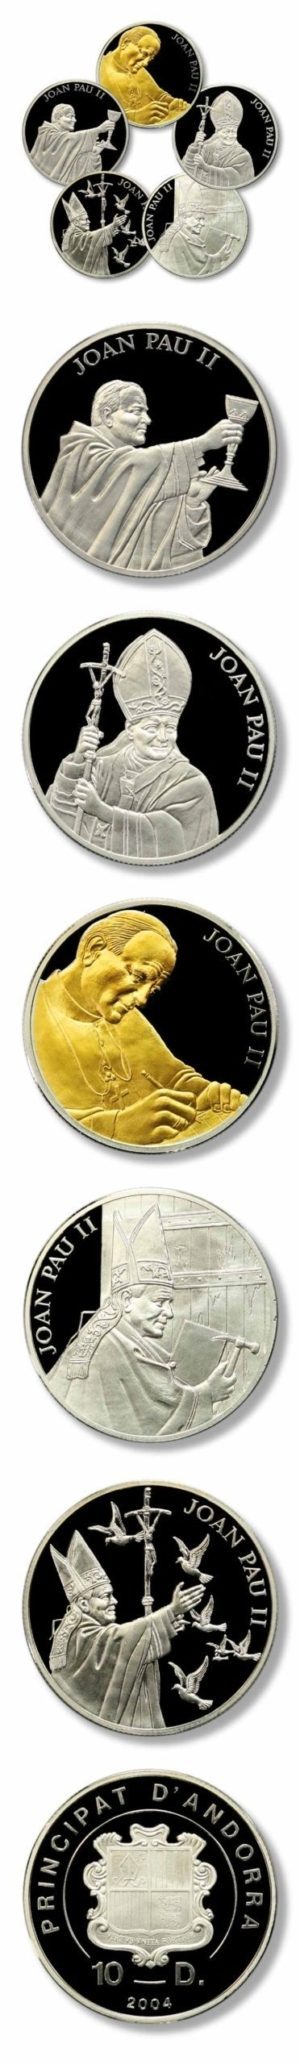 Andorra-(5) Crown Set Celebrating the Life of Pope John Paul II-10 Diners-2004-Proof Silver